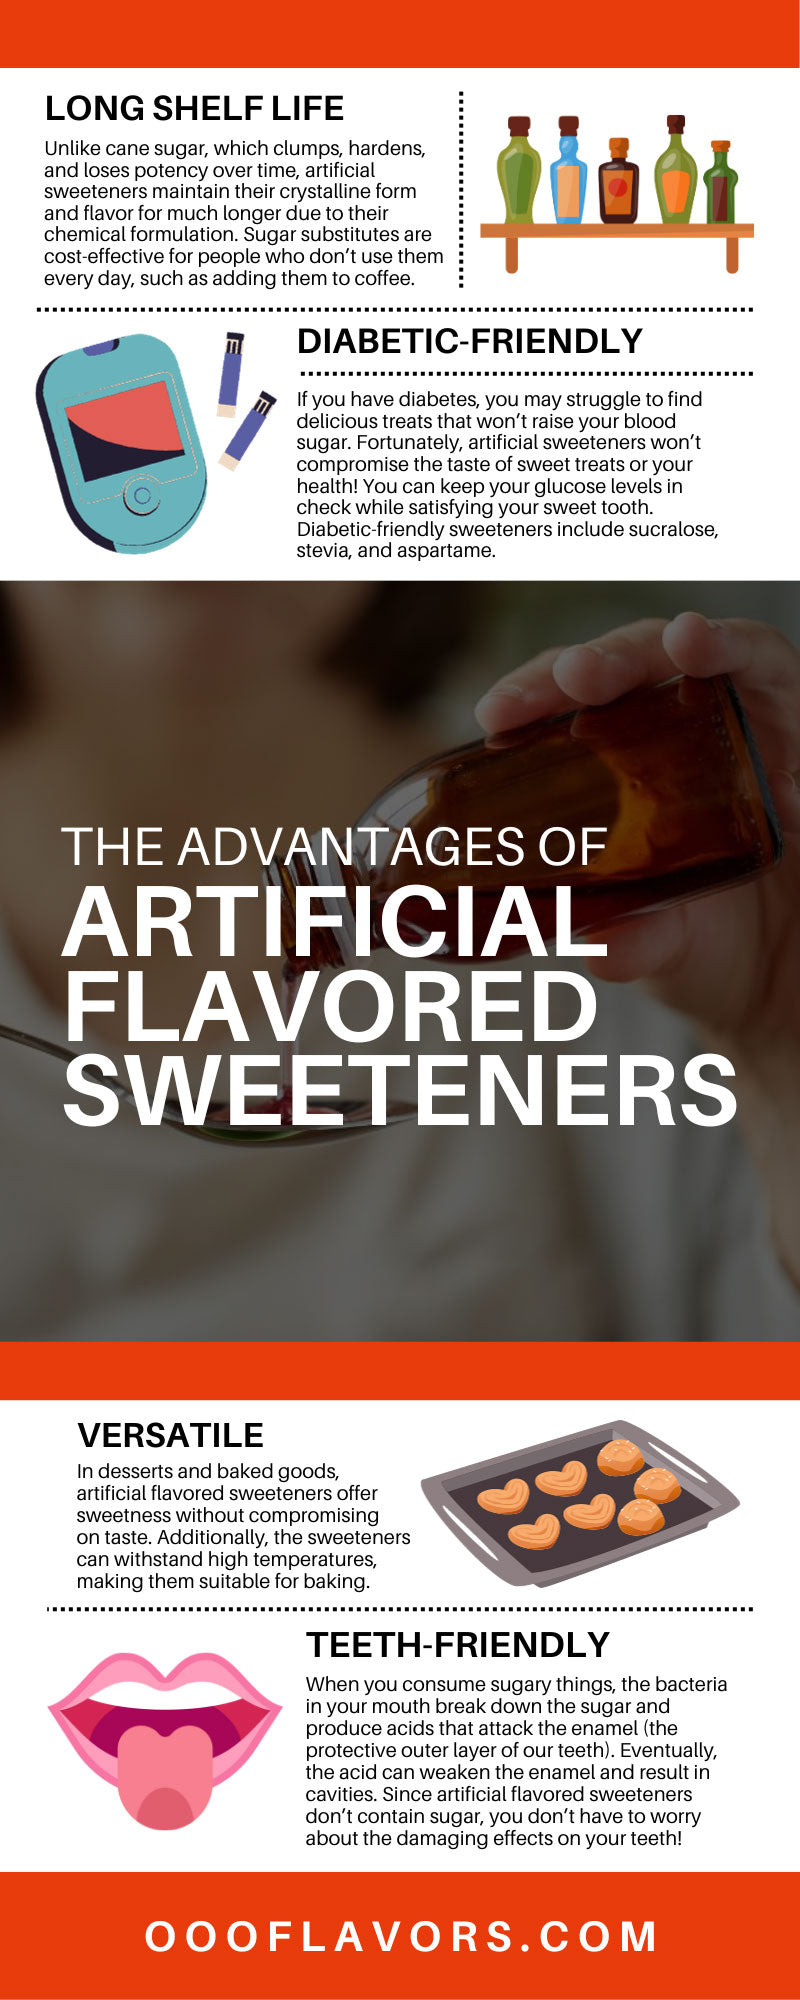 The Advantages of Artificial Flavored Sweeteners